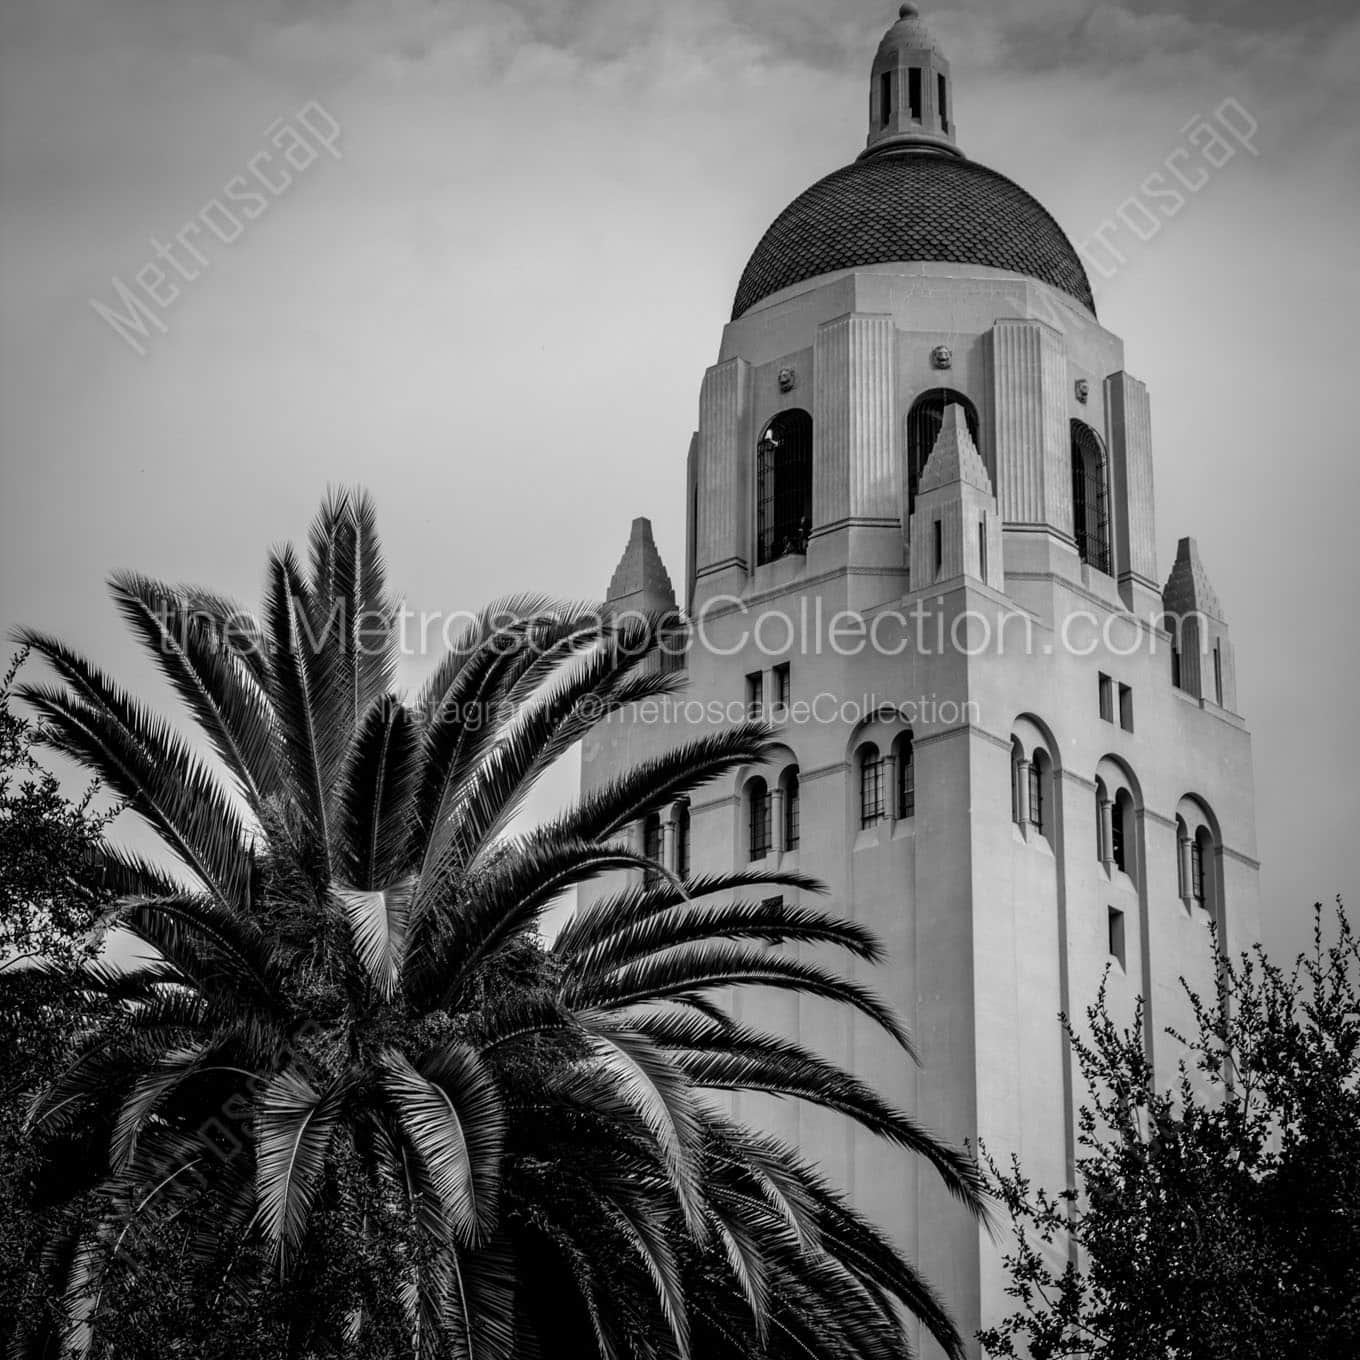 hoover tower stanford university campus Black & White Wall Art